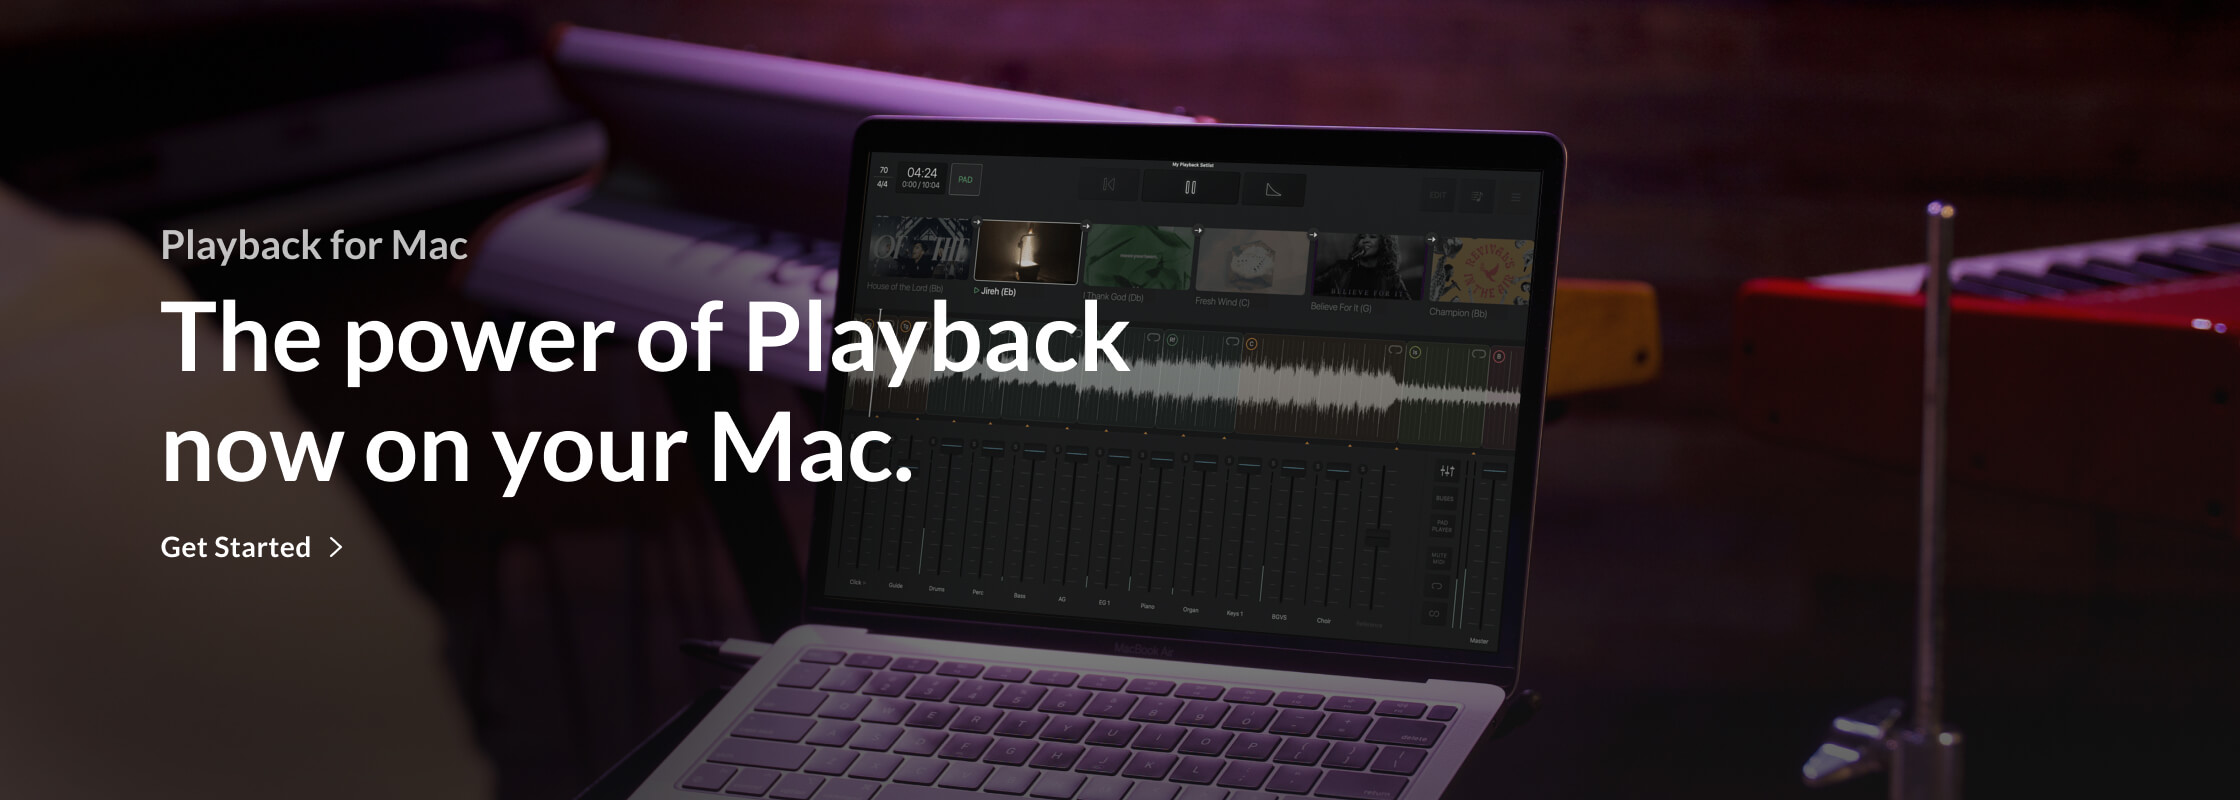 Playback for Mac